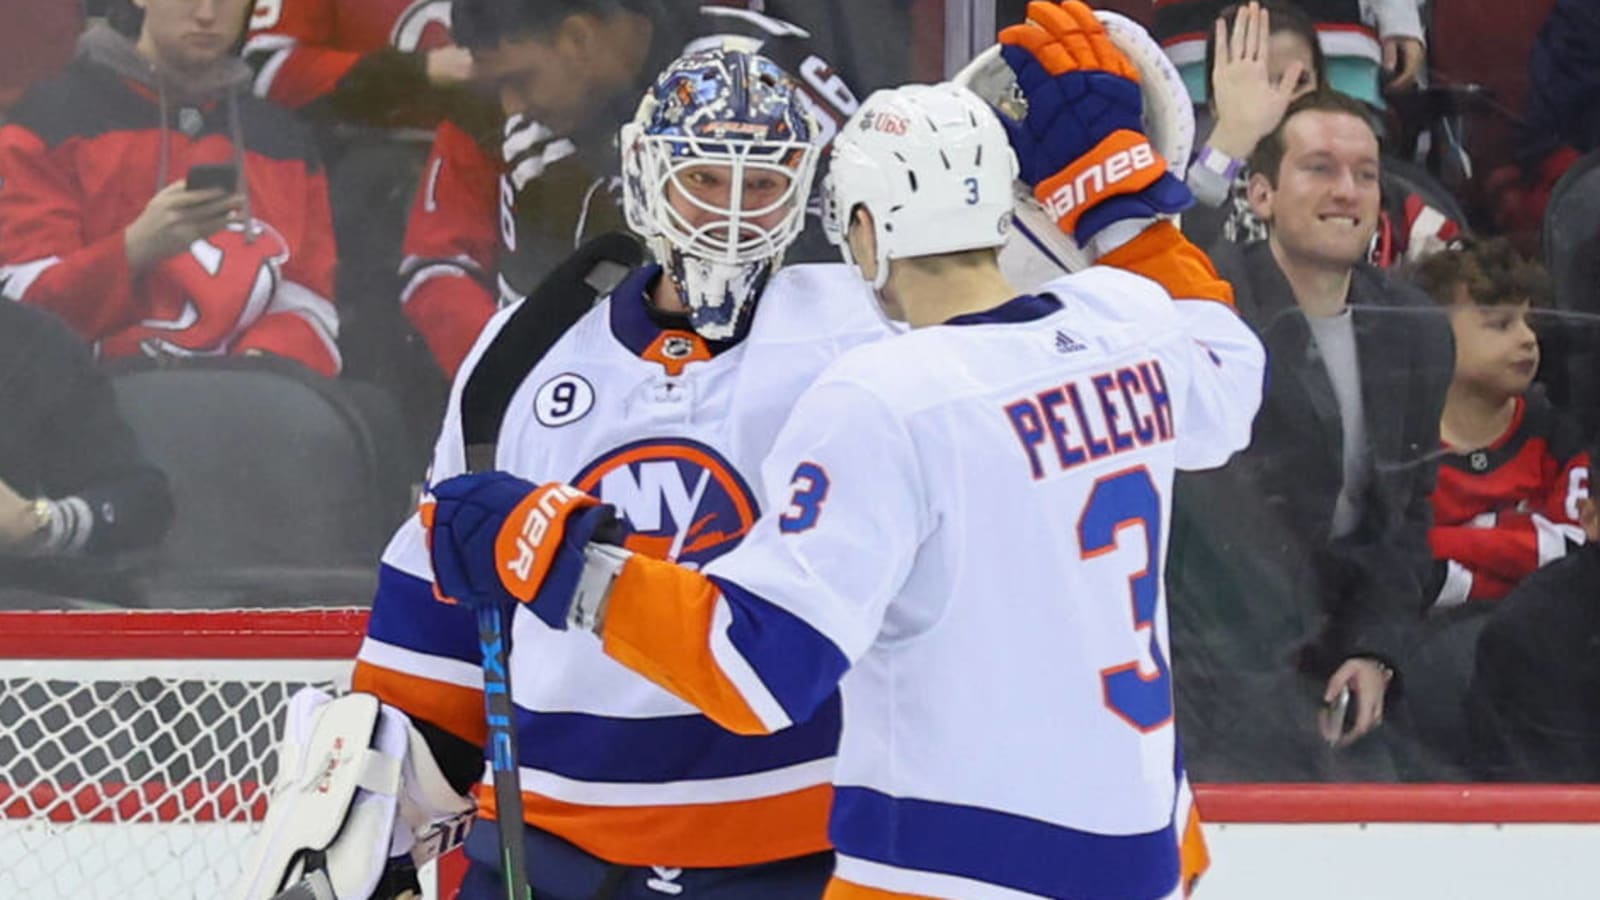 Schneider leads Isles to 4-3 win in first start in two years